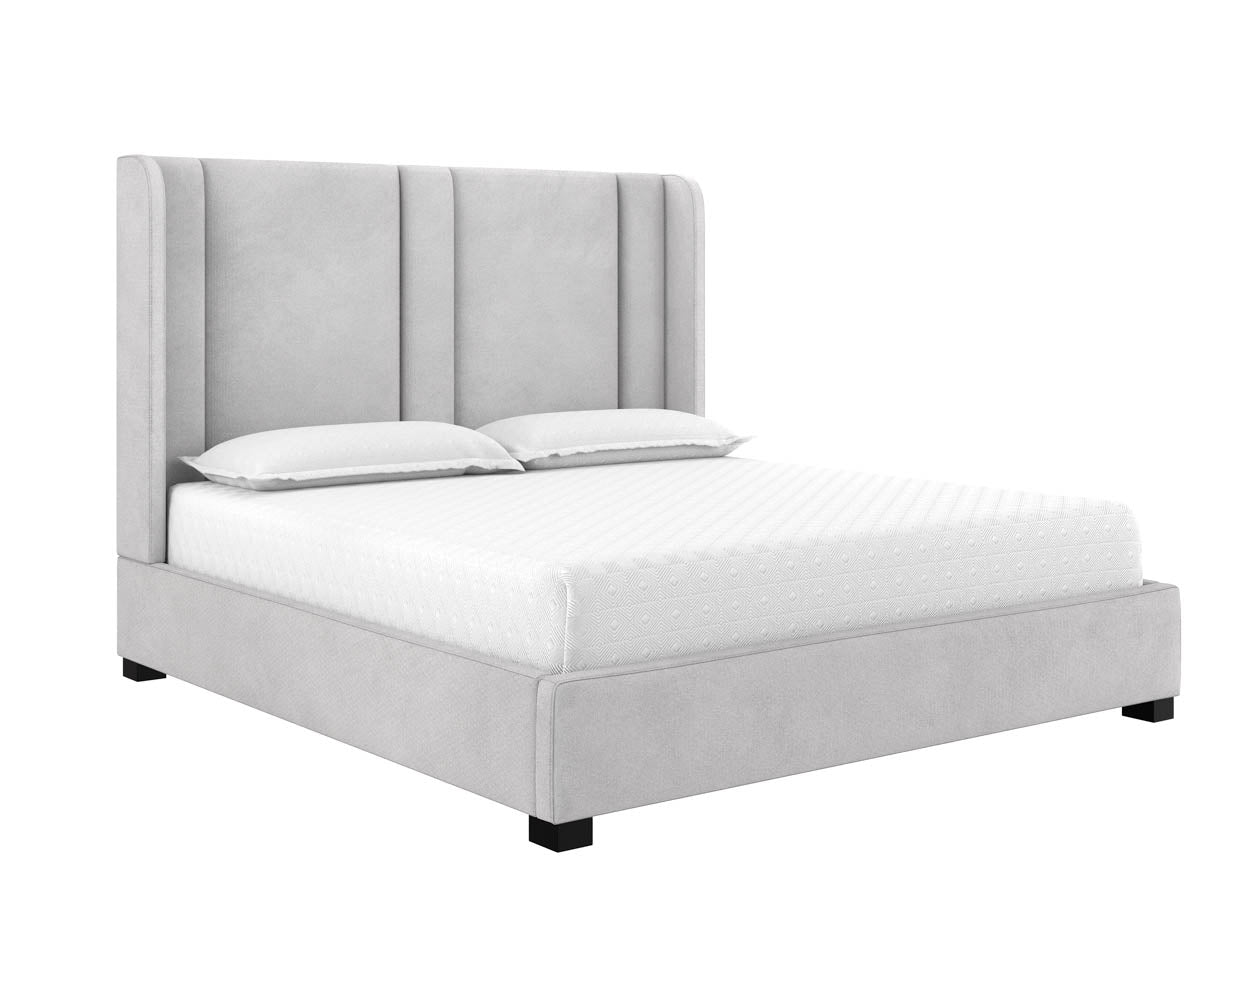 Clemonte Bed - King - Polo Club Stone